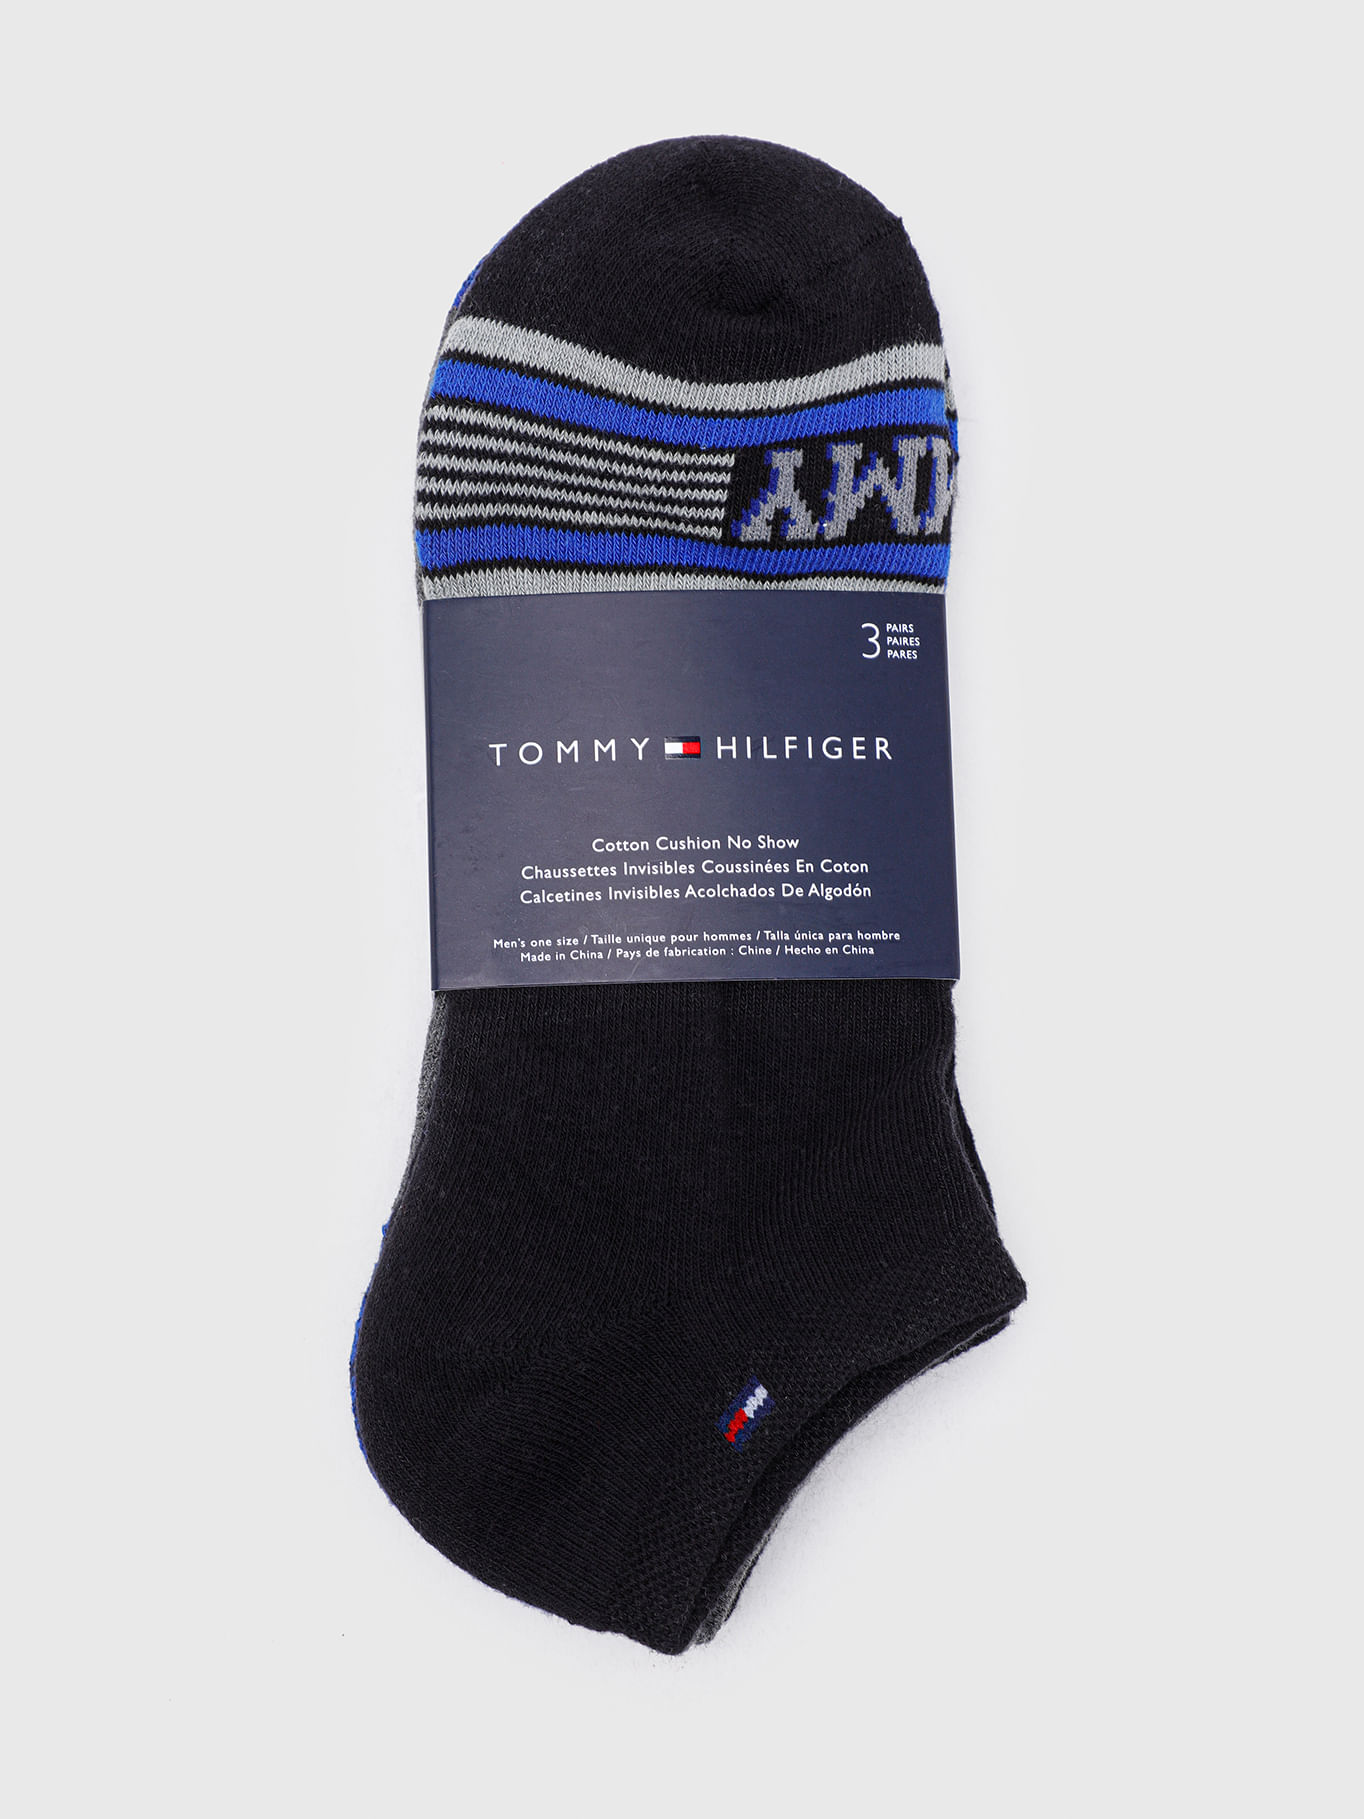 Tommy Hilfiger Calcetines para mujer – Forros ligeros invisibles (paquete  de 6)